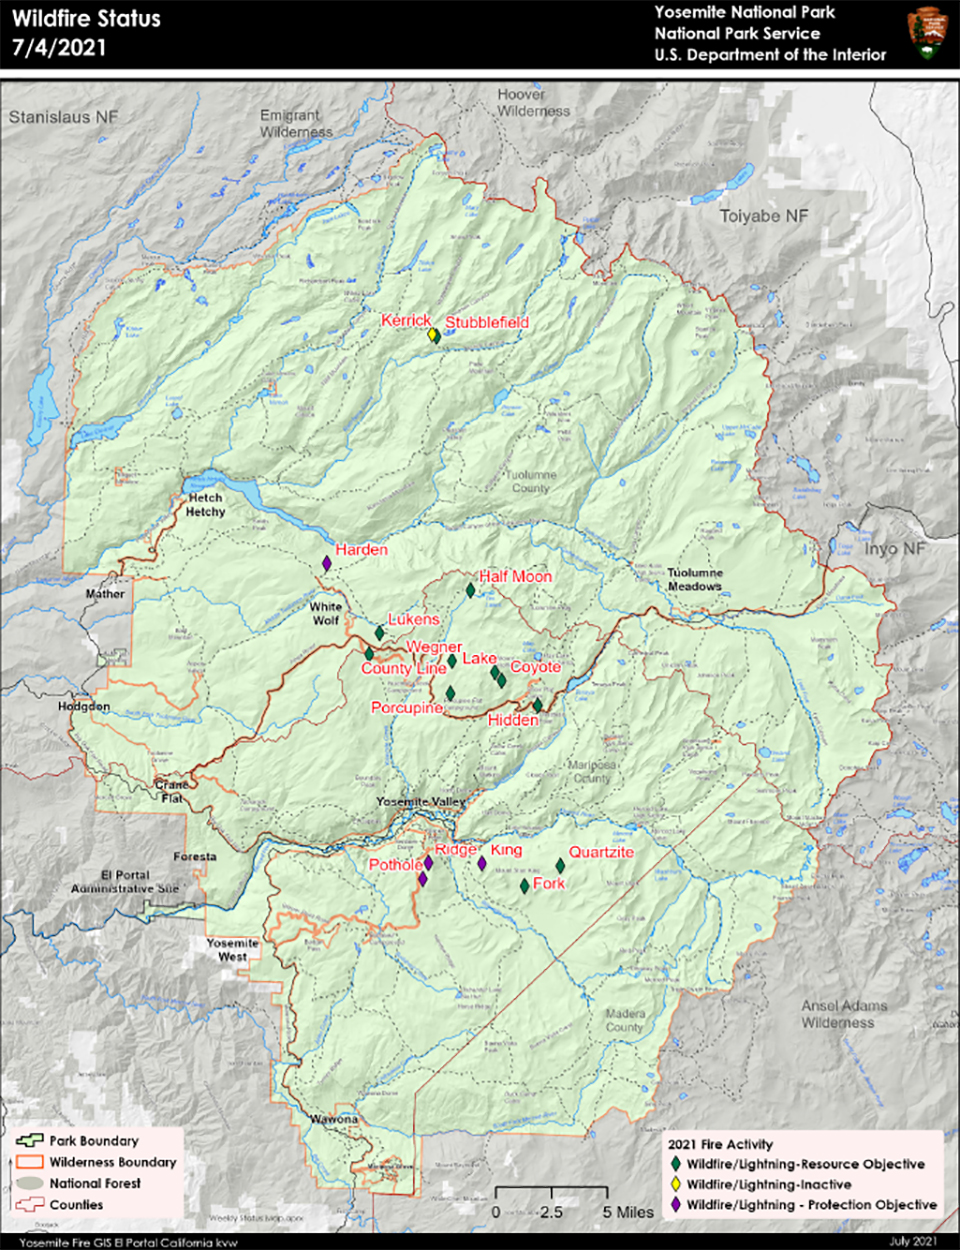 Map of Yosemite showing diamond symbols of fire locations for July 6, 2021 